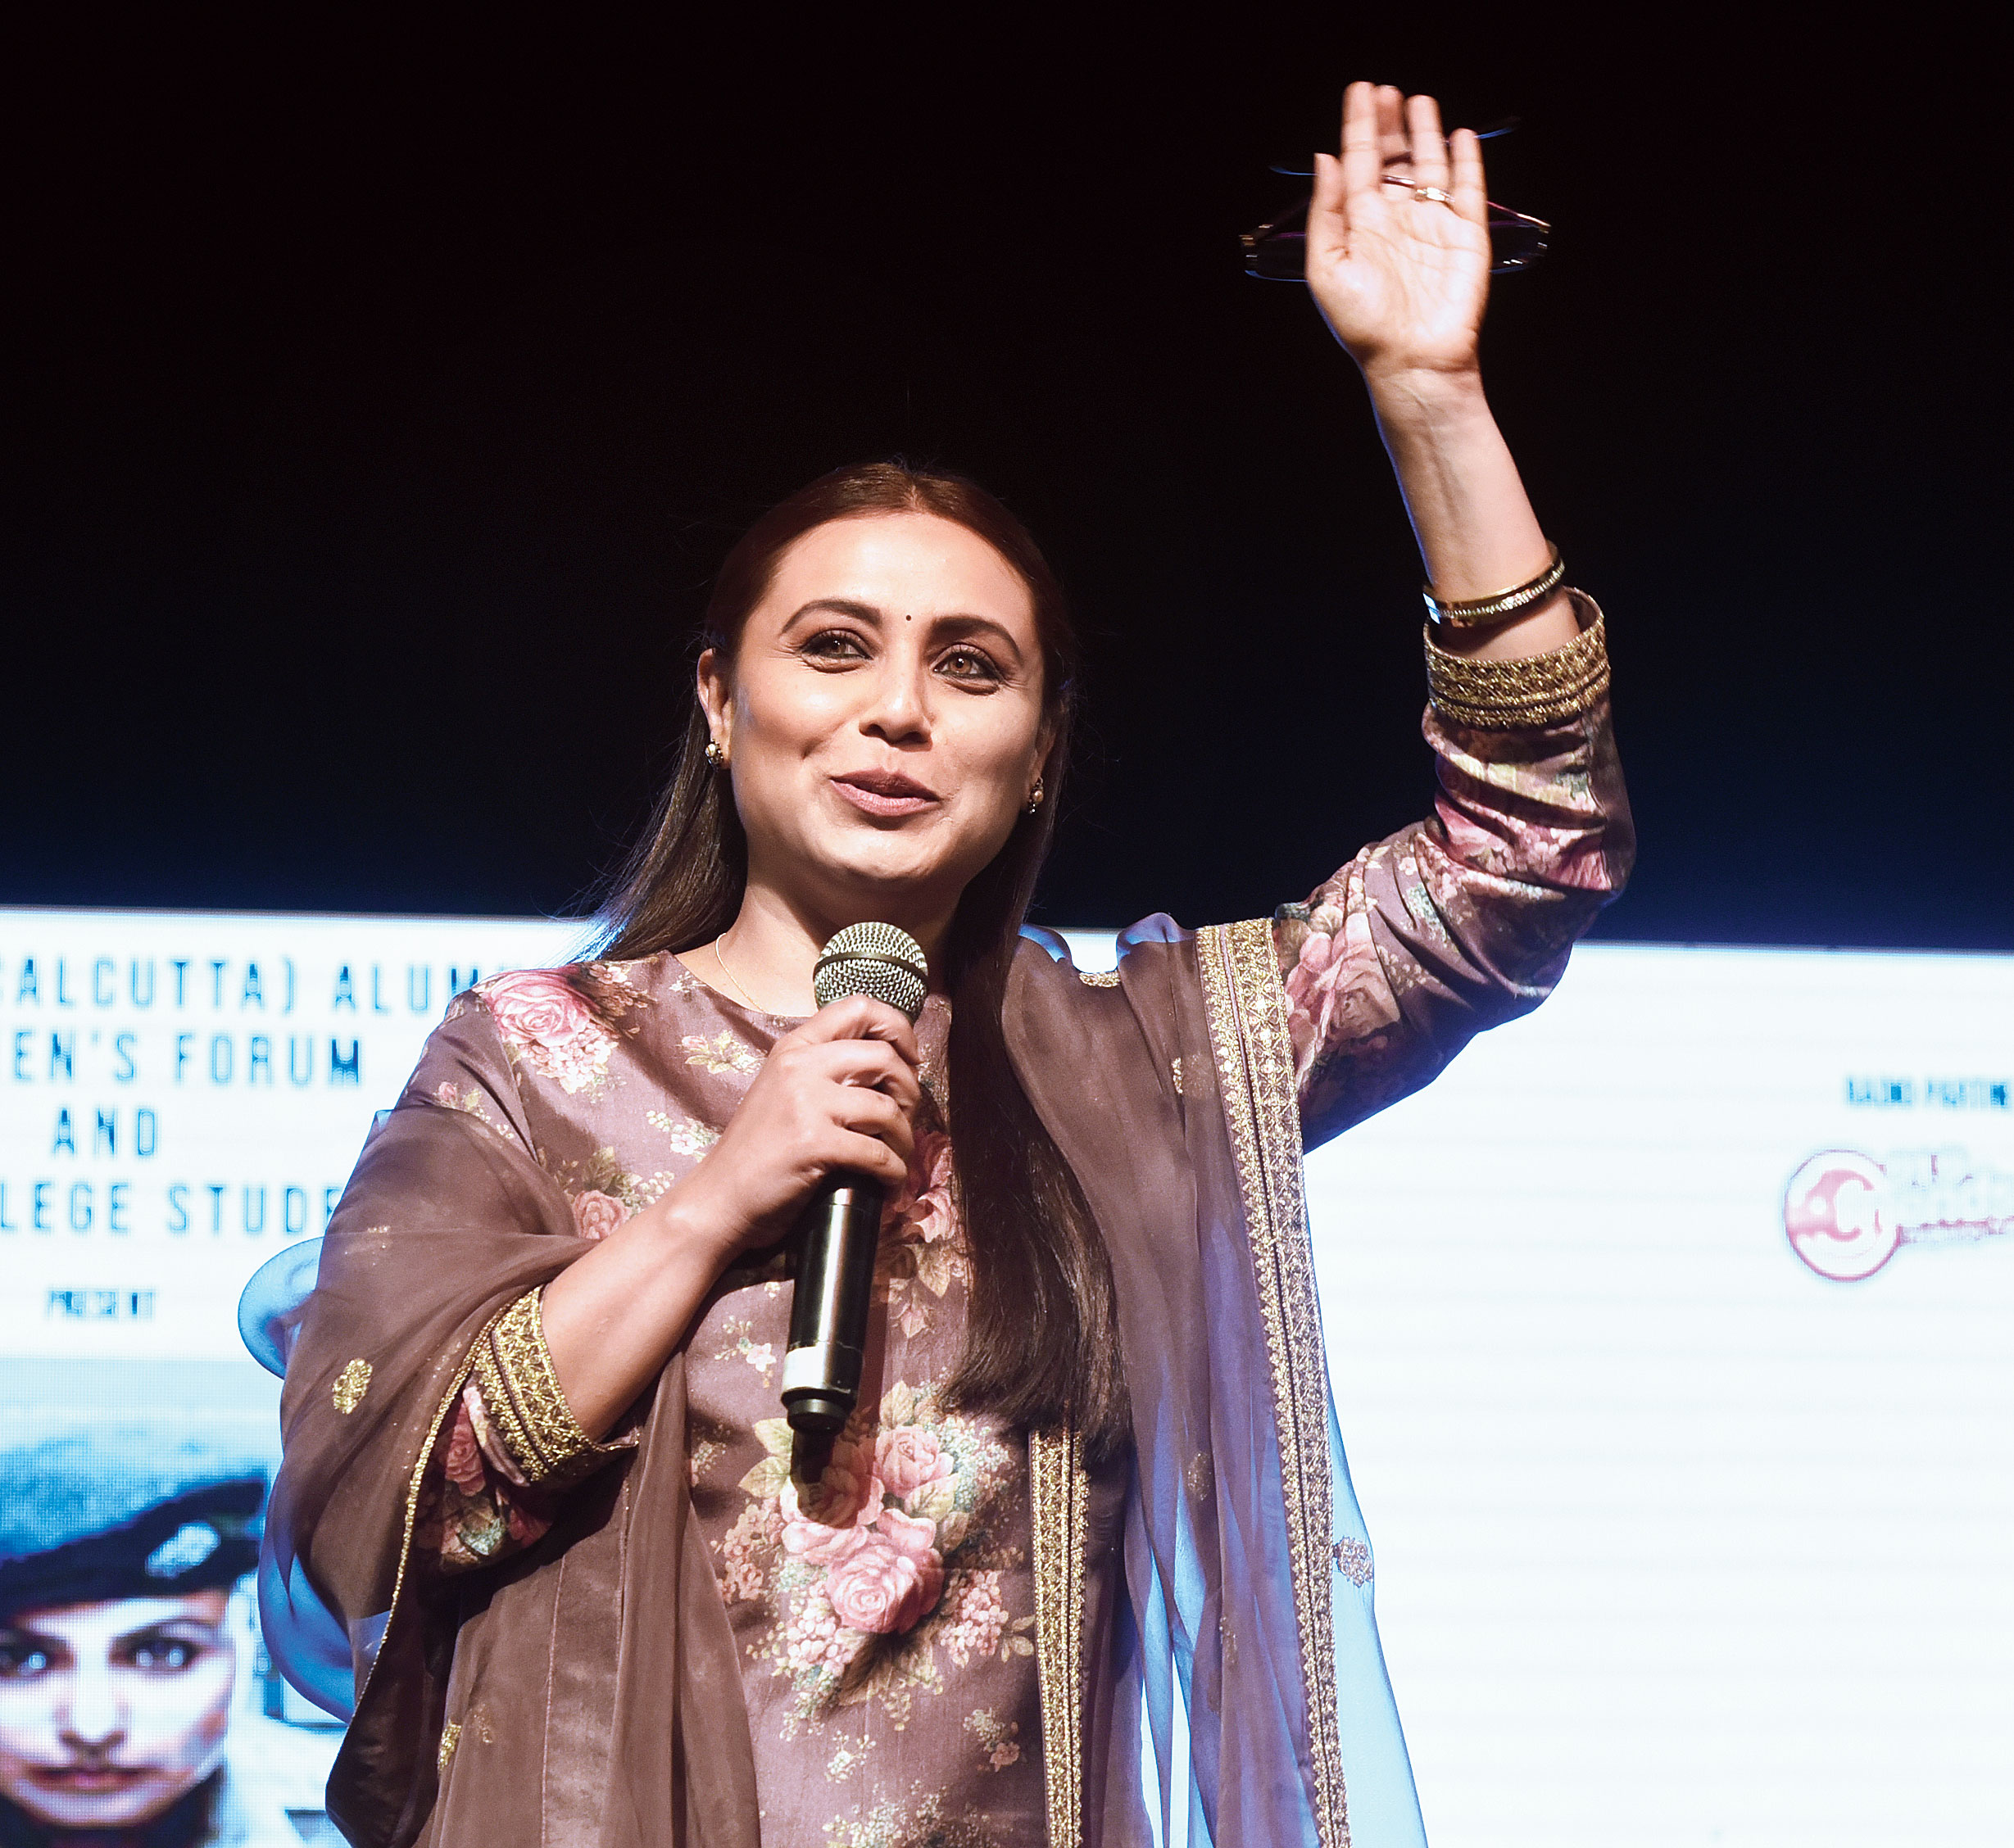 St. Xavier’s College was the hub of activity on a recent November afternoon. A little after 3pm, Rani Mukerji walked into the college auditorium to huge claps and cheers, striding on to  stage to not only promote her latest film Mardaani 2, but also to stress on the need for women’s safety. “Kolkata-r bhalobasha ekdom mishti roshogolla-r moto,” smiled Rani, stunning in a Sabyasachi suit, even as the students broke into applause. “In Mardaani, I kicked butt and in Mardaani 2, I take over the belt. So all the ladies in the house, I hope you wear belts!” chuckled Rani, who reprises her role of tough cop Shivani Shivaji Roy.